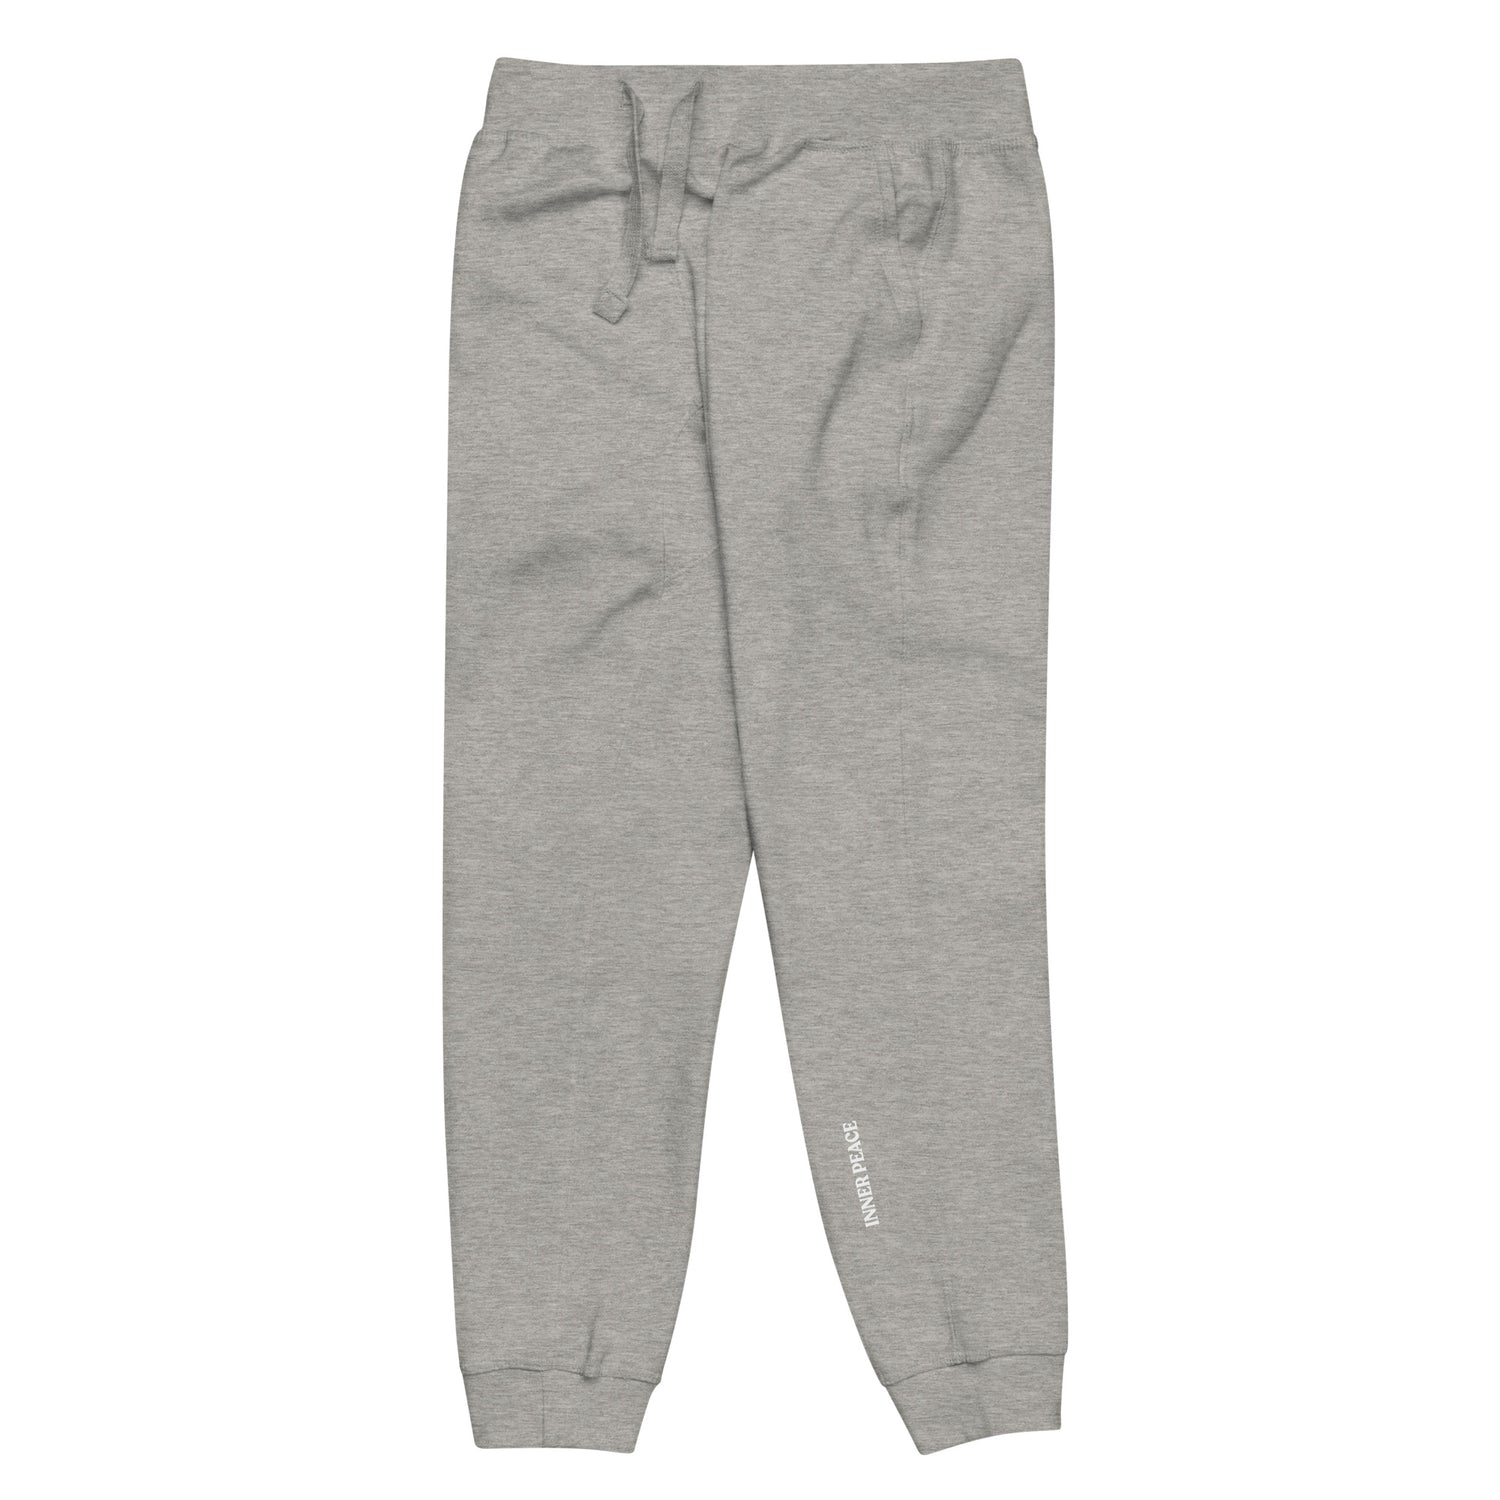 Side of grey sweat pant featuring " Inner peace' printed on left lower leg.